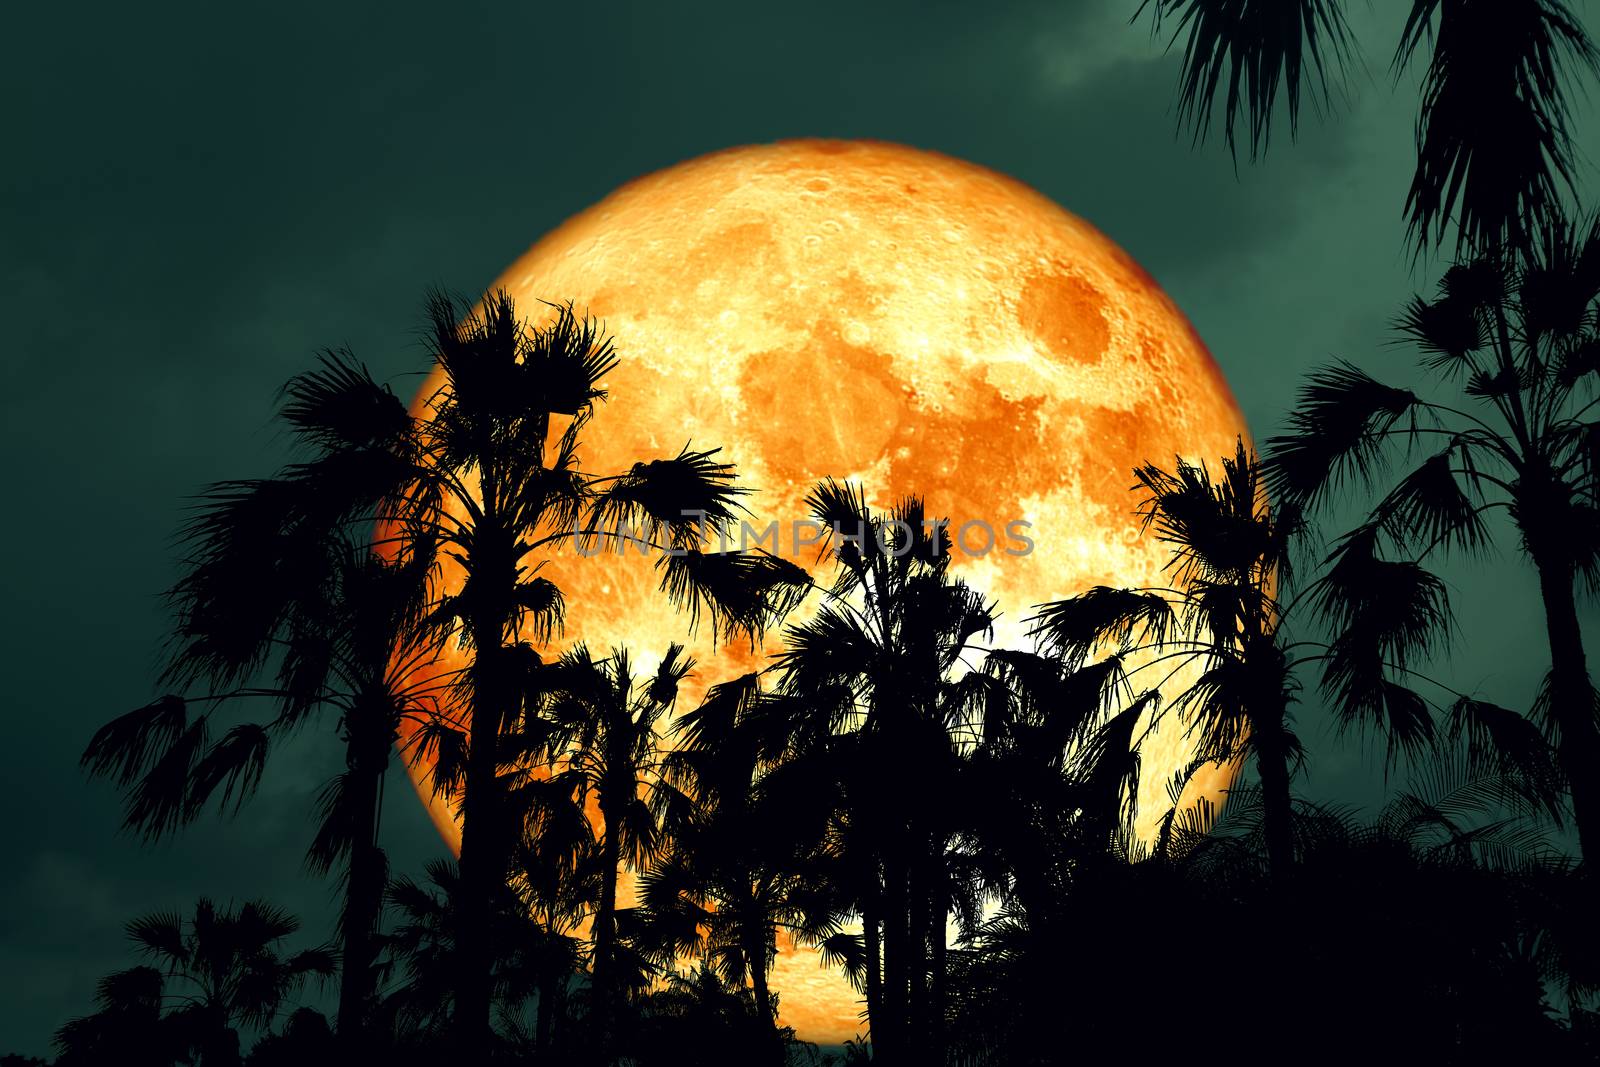 pink Full Hunger Moon on night sky back silhouette palm tree, Elements of this image furnished by NASA